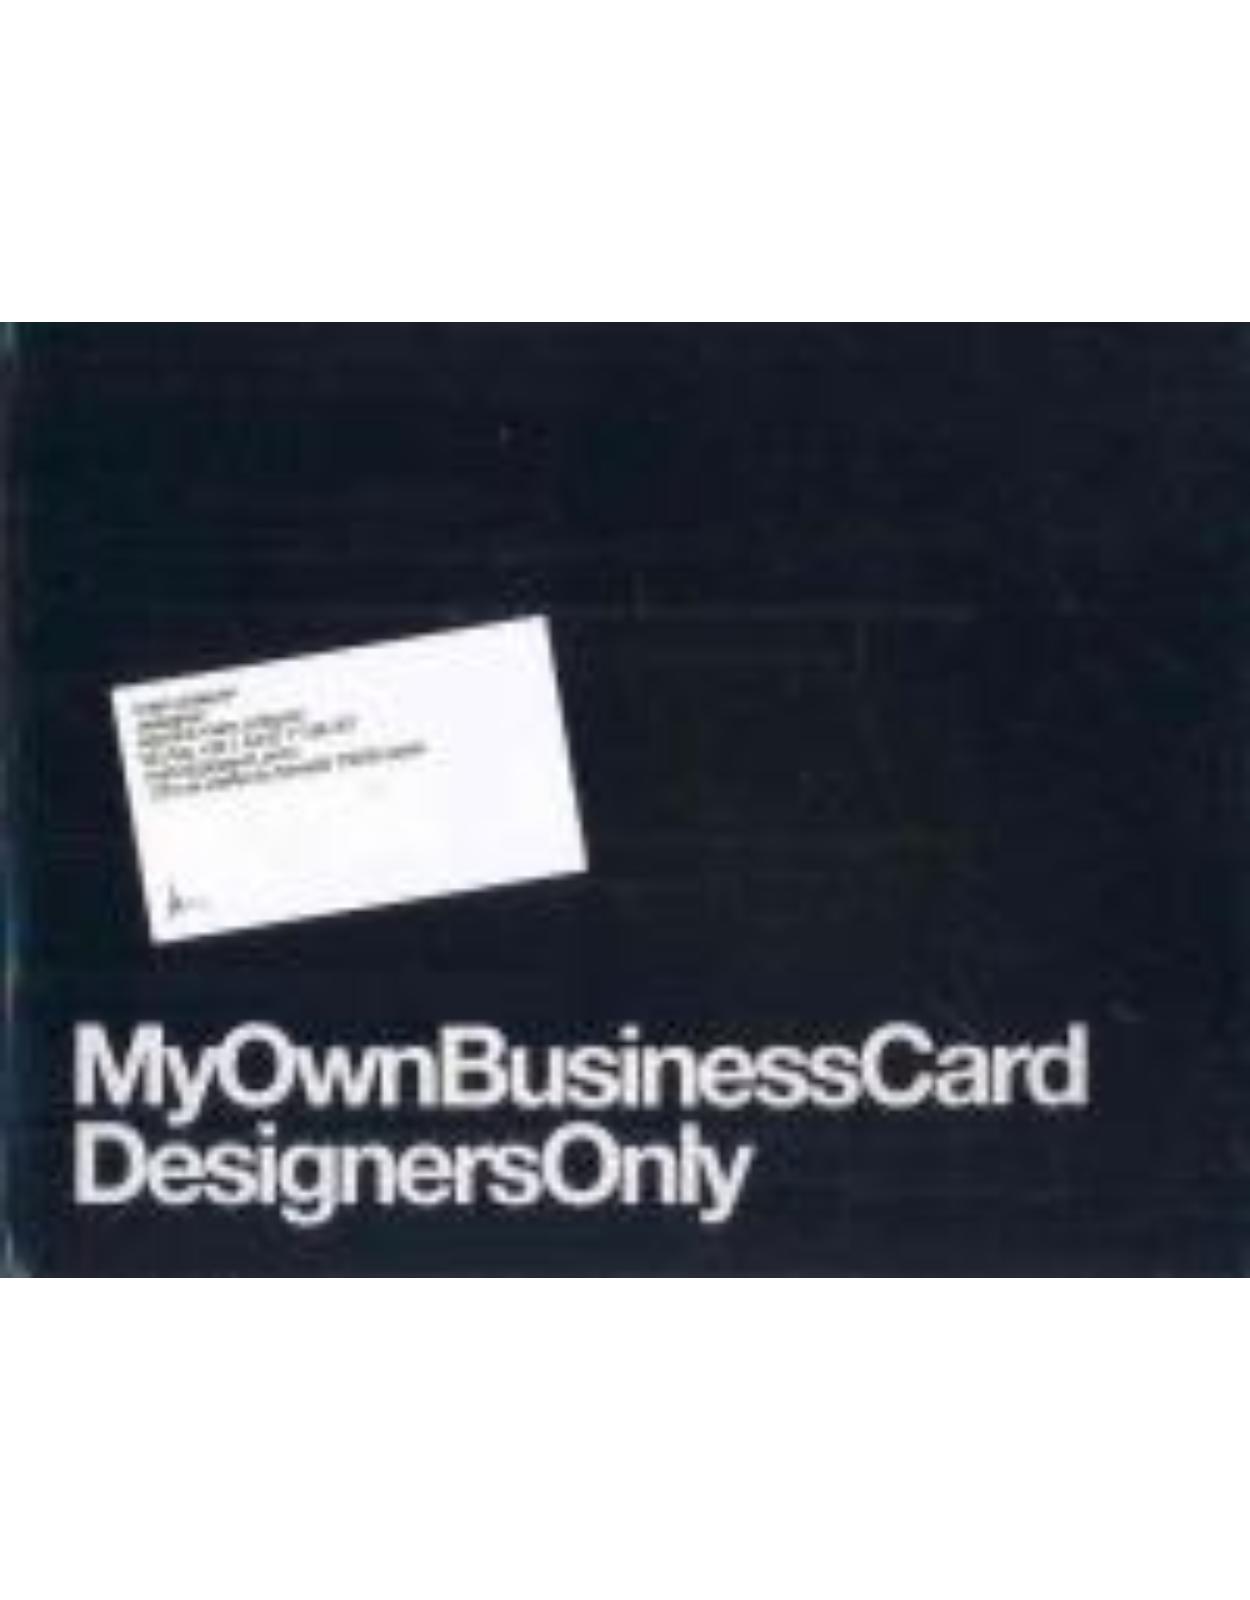 My Own Business Card: Designers Only